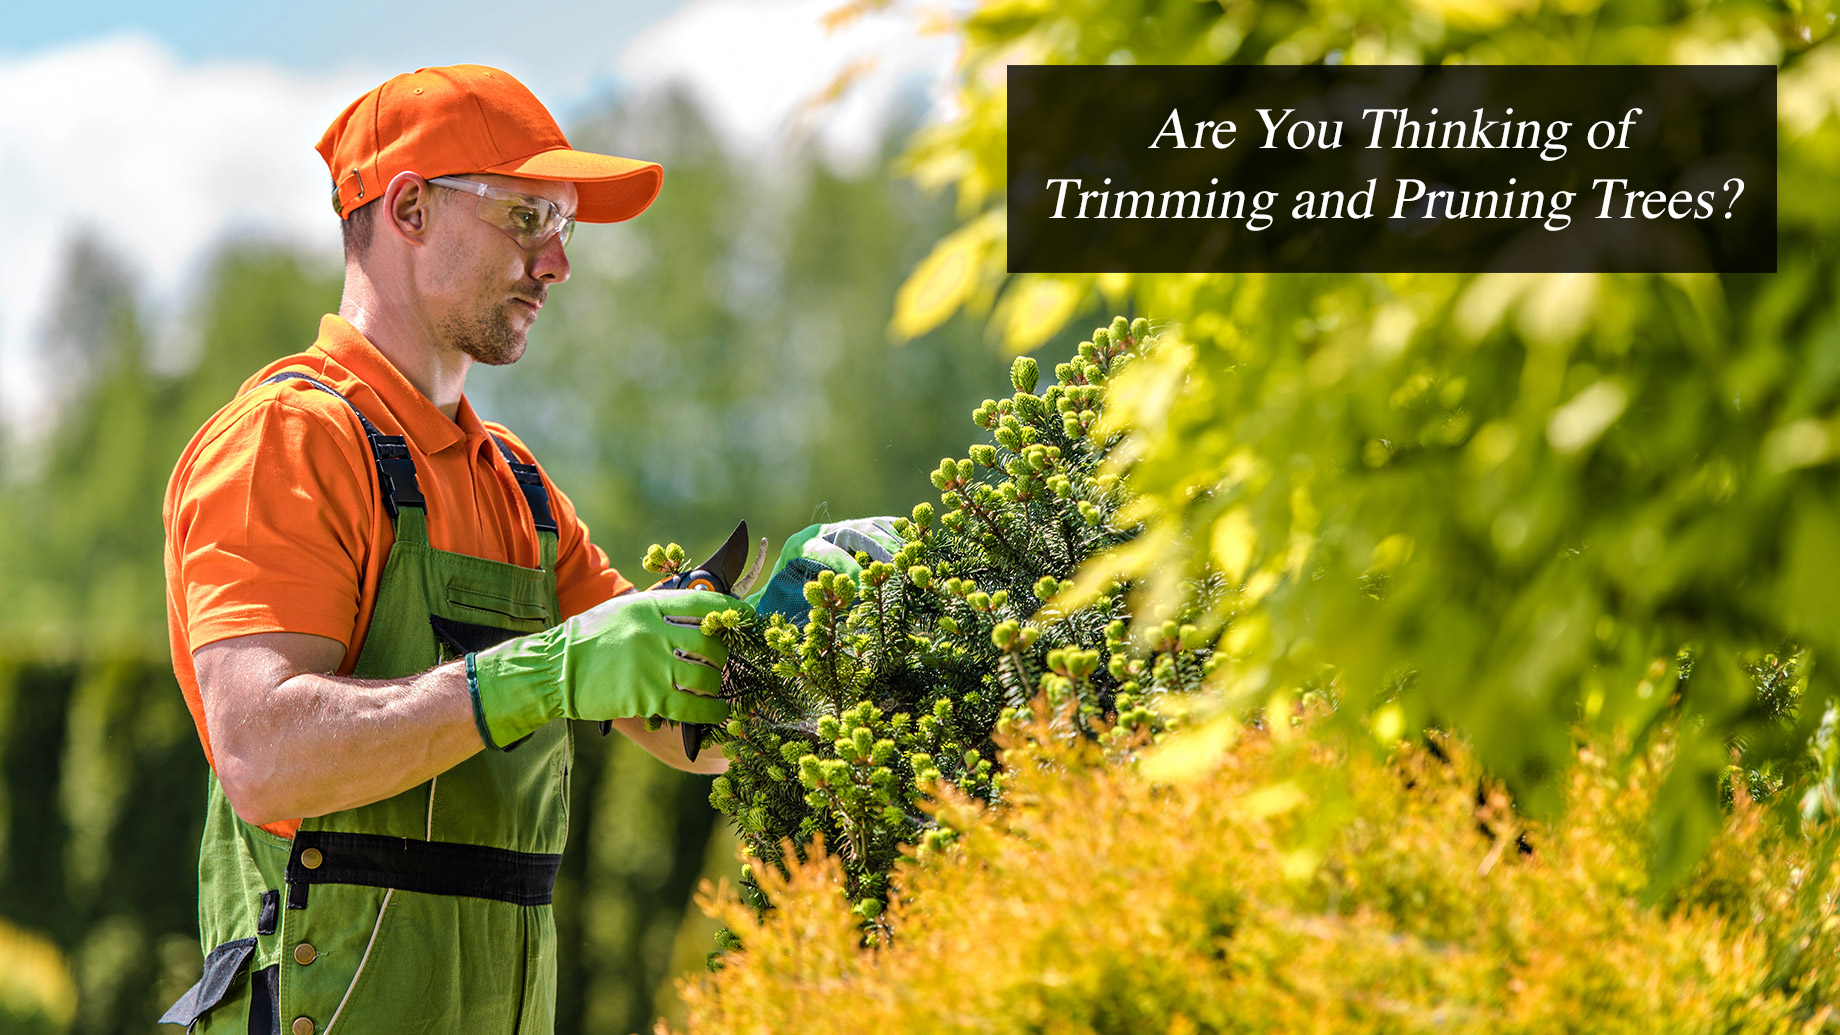 Are You Thinking of Trimming and Pruning Trees?